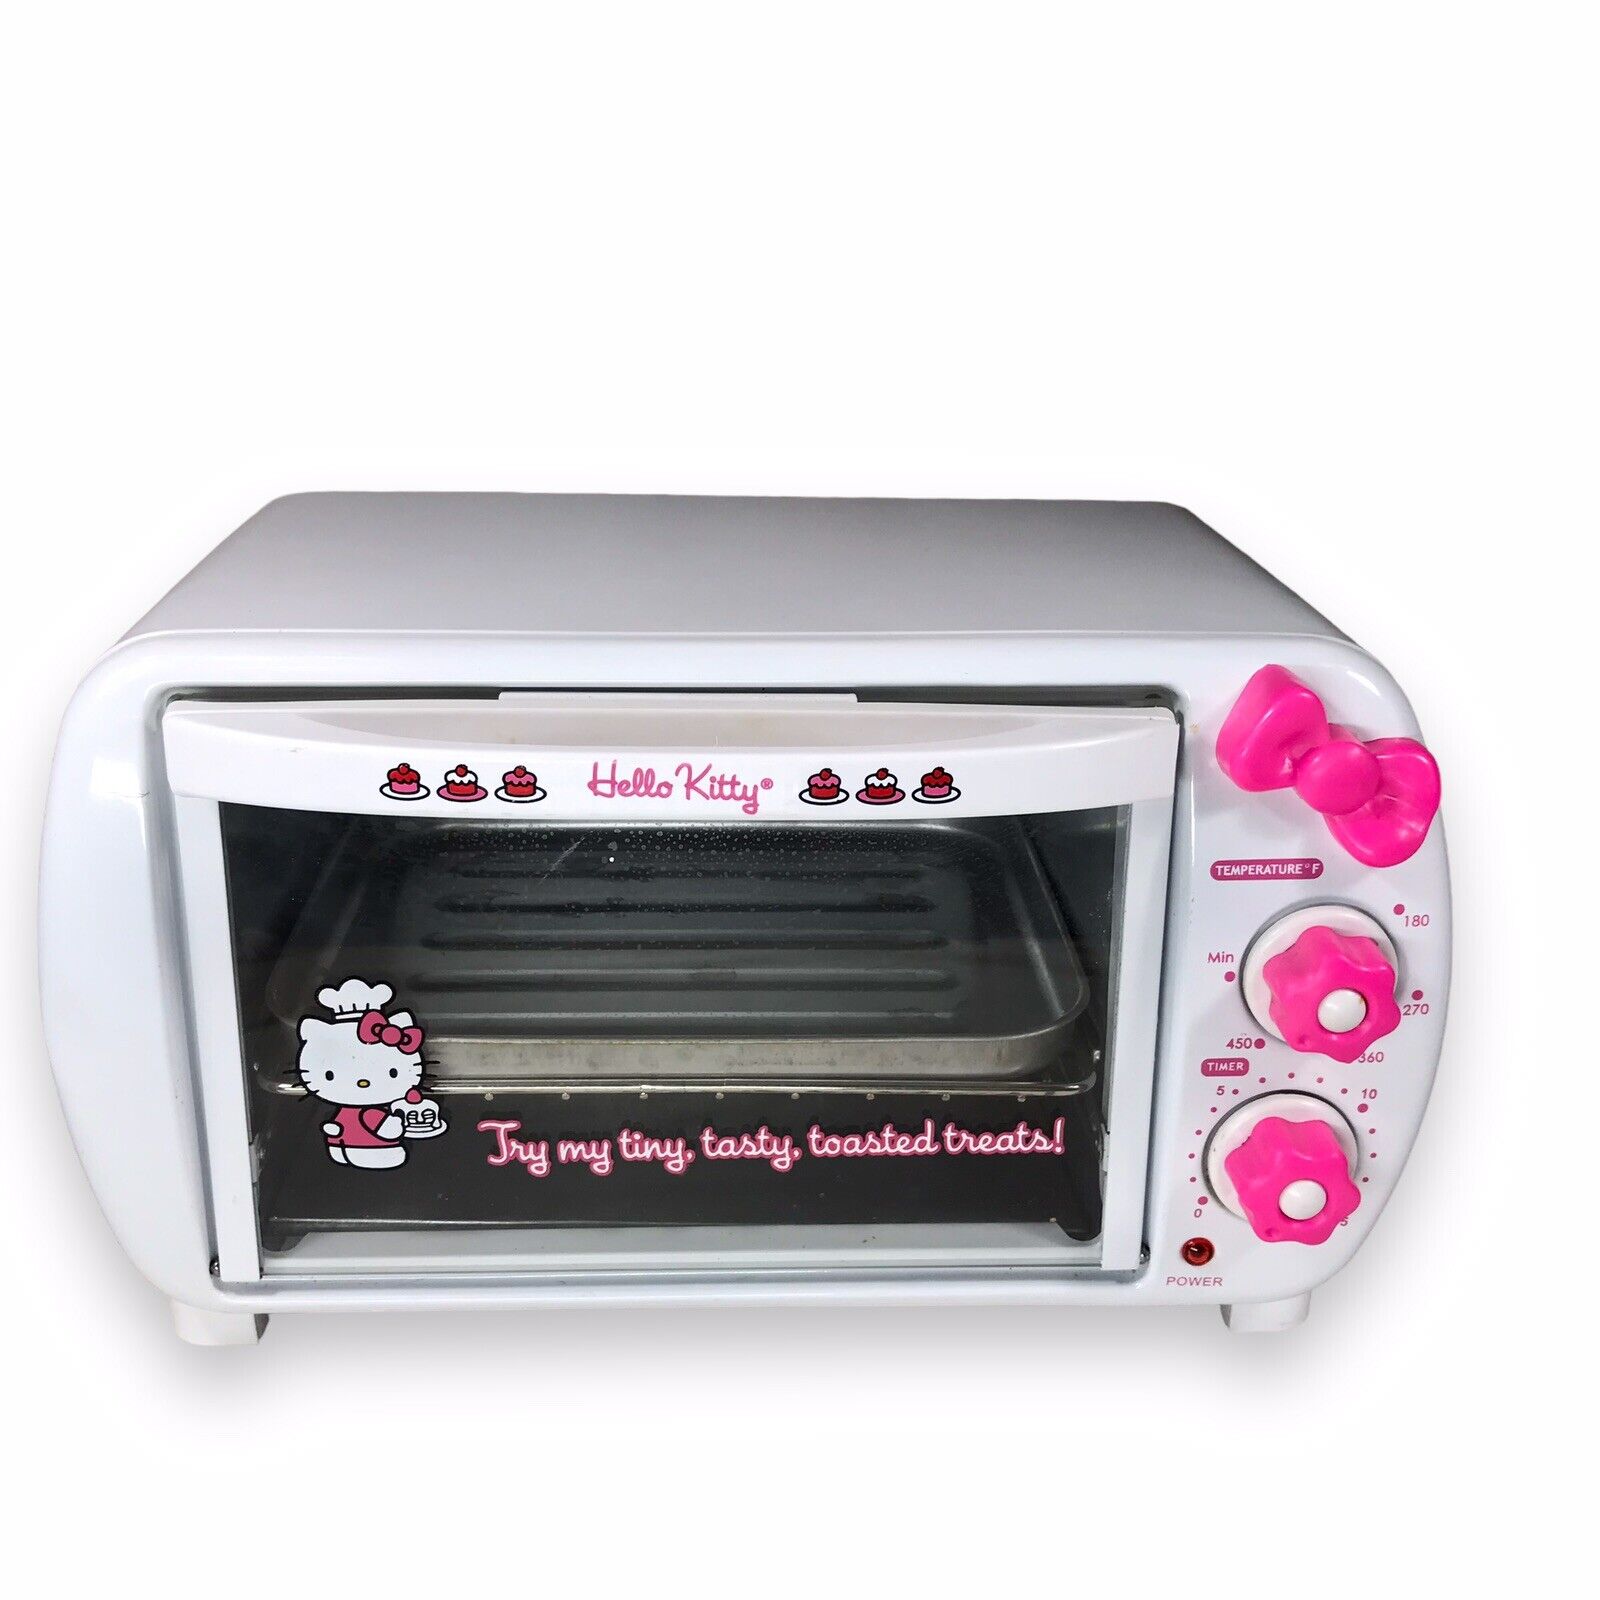 RARE Sanrio Hello Kitty 2 Slice Toaster Oven Tested And Works Great 2007